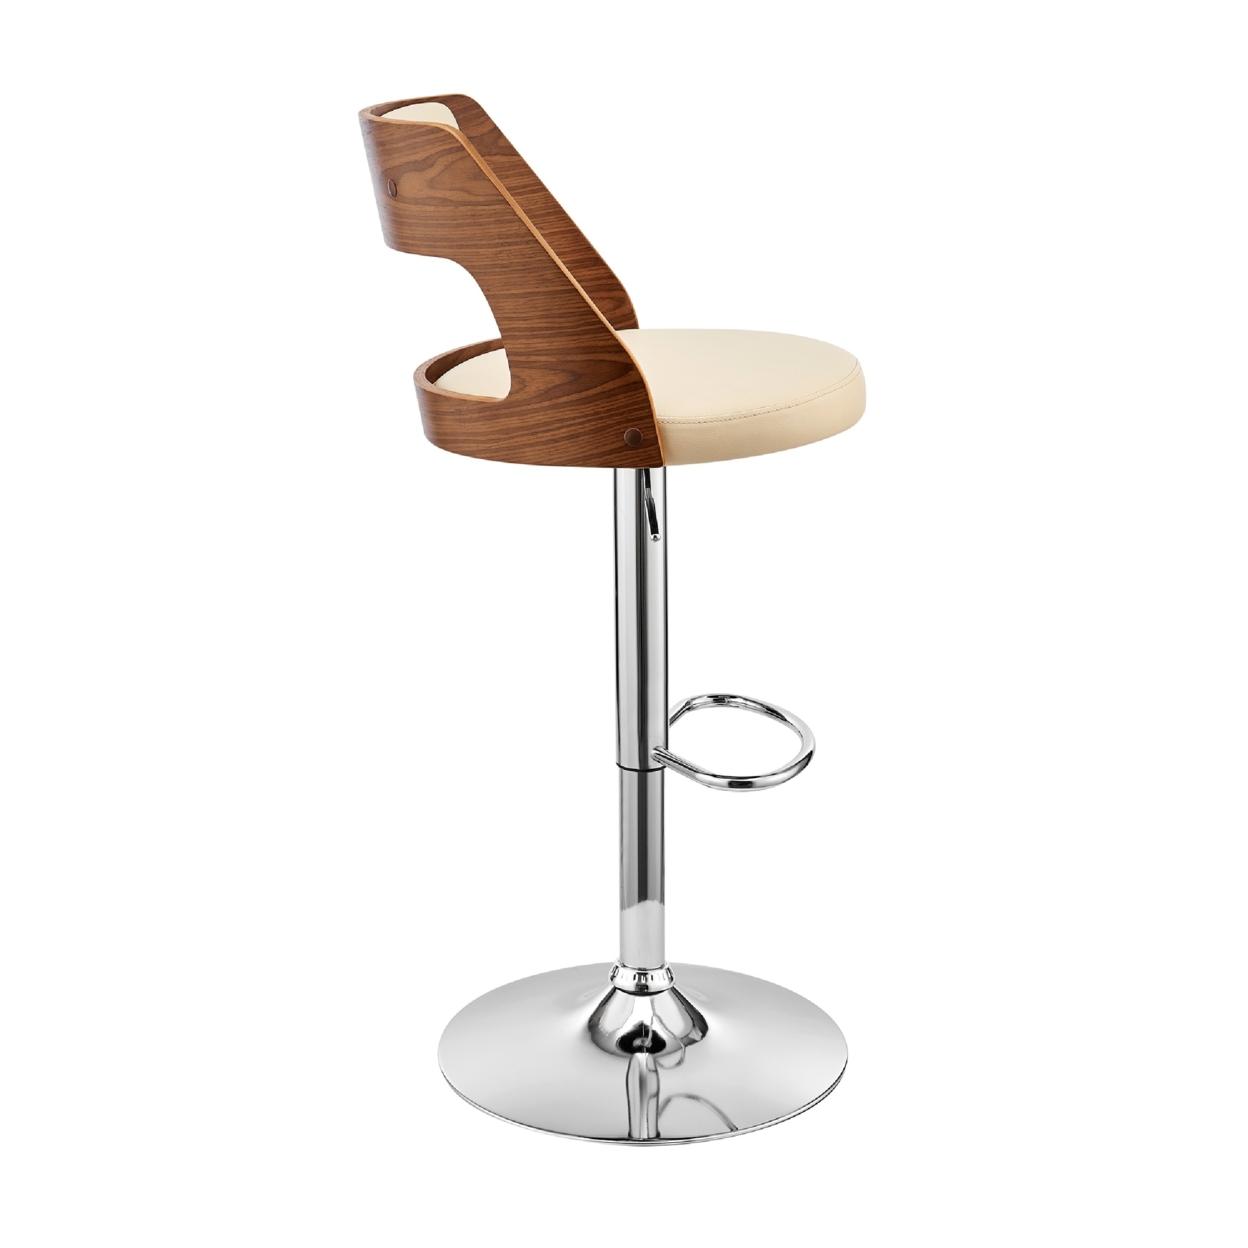 Adjustable Barstool With Open Wooden Back, Cream And Brown- Saltoro Sherpi